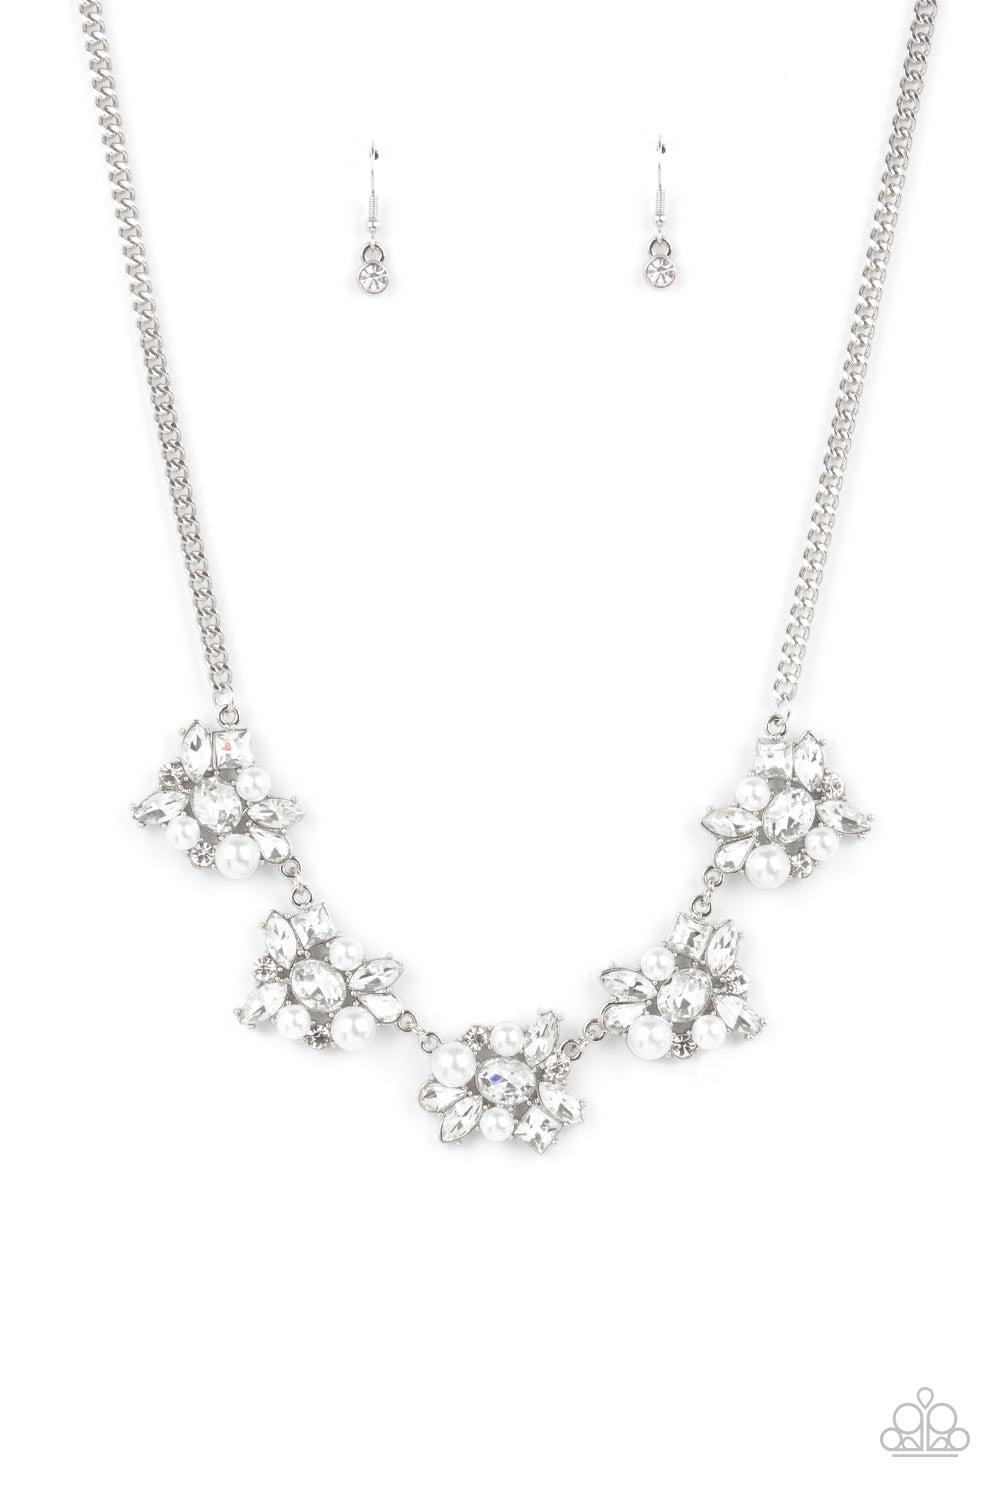 Paparazzi Accessories - HEIRESS of Them All - #N511 White Necklace